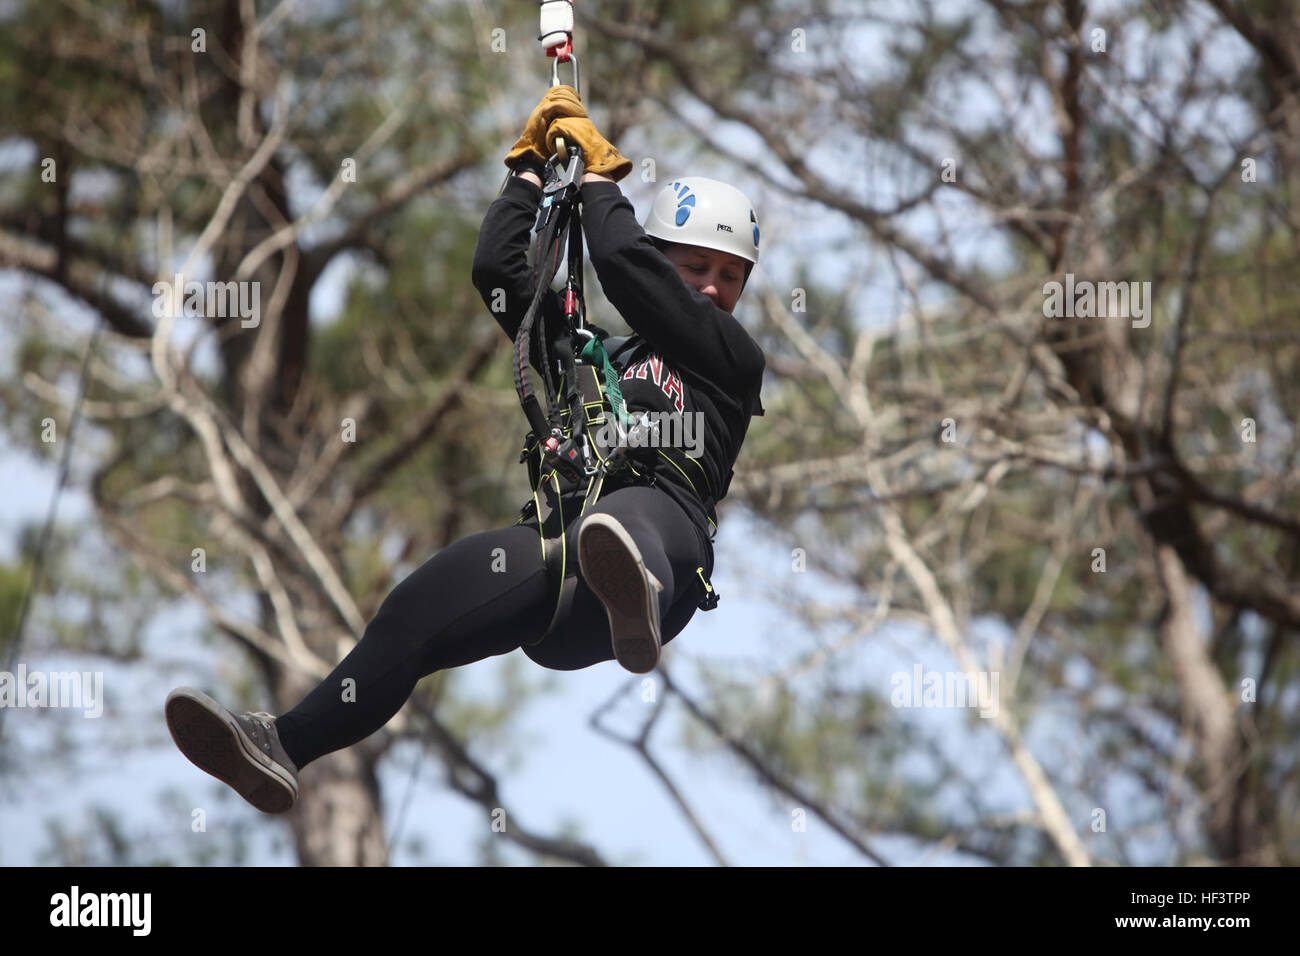 Sgt. Laura B. Freitas descends from a 65-foot free fall tower during the Devil Dog Dare Challenge Course at Marine Corps Air Station Cherry Point, N.C., March 10, 2016. The Devil Dog Dare Challenge Course was designed for Marines and Sailors to get engaged in Operation Adrenaline Rush. OAR is a training tool designed to introduce Marines to activities that serve as alternatives to uncharacteristic behaviors often associated with incidents involving recently deployed Marines. Freitas is a cyber network operator, G-6, 2nd Marine Aircraft Wing. (U.S. Marine Corps photo by Pfc. Nicholas P. Baird/R Stock Photo